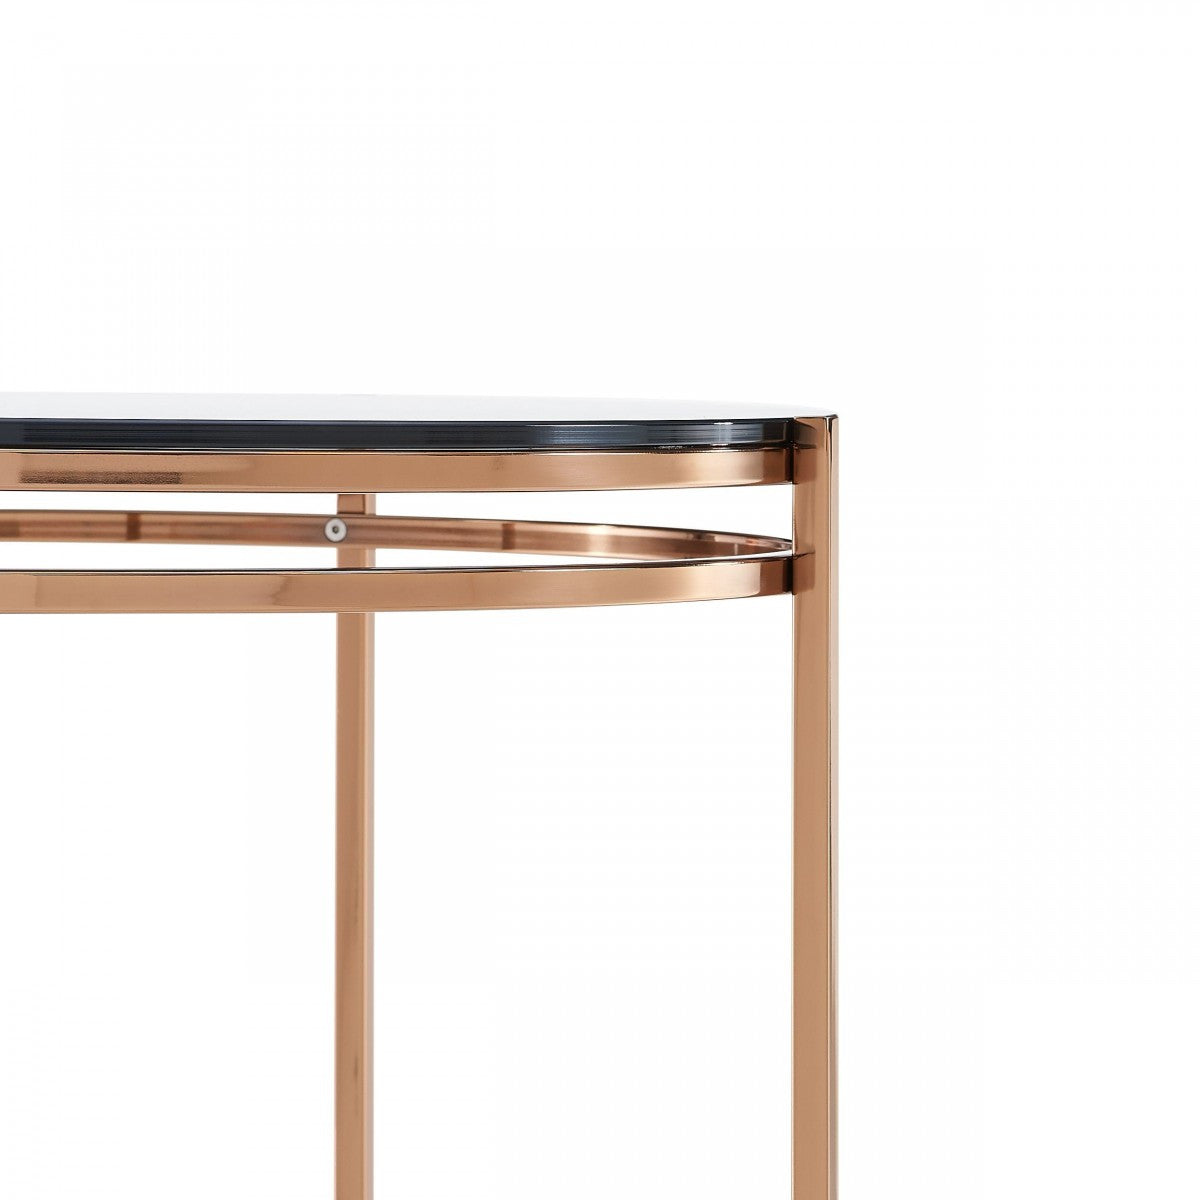 22" Rosegold And Smoke Glass Geo Round End Table